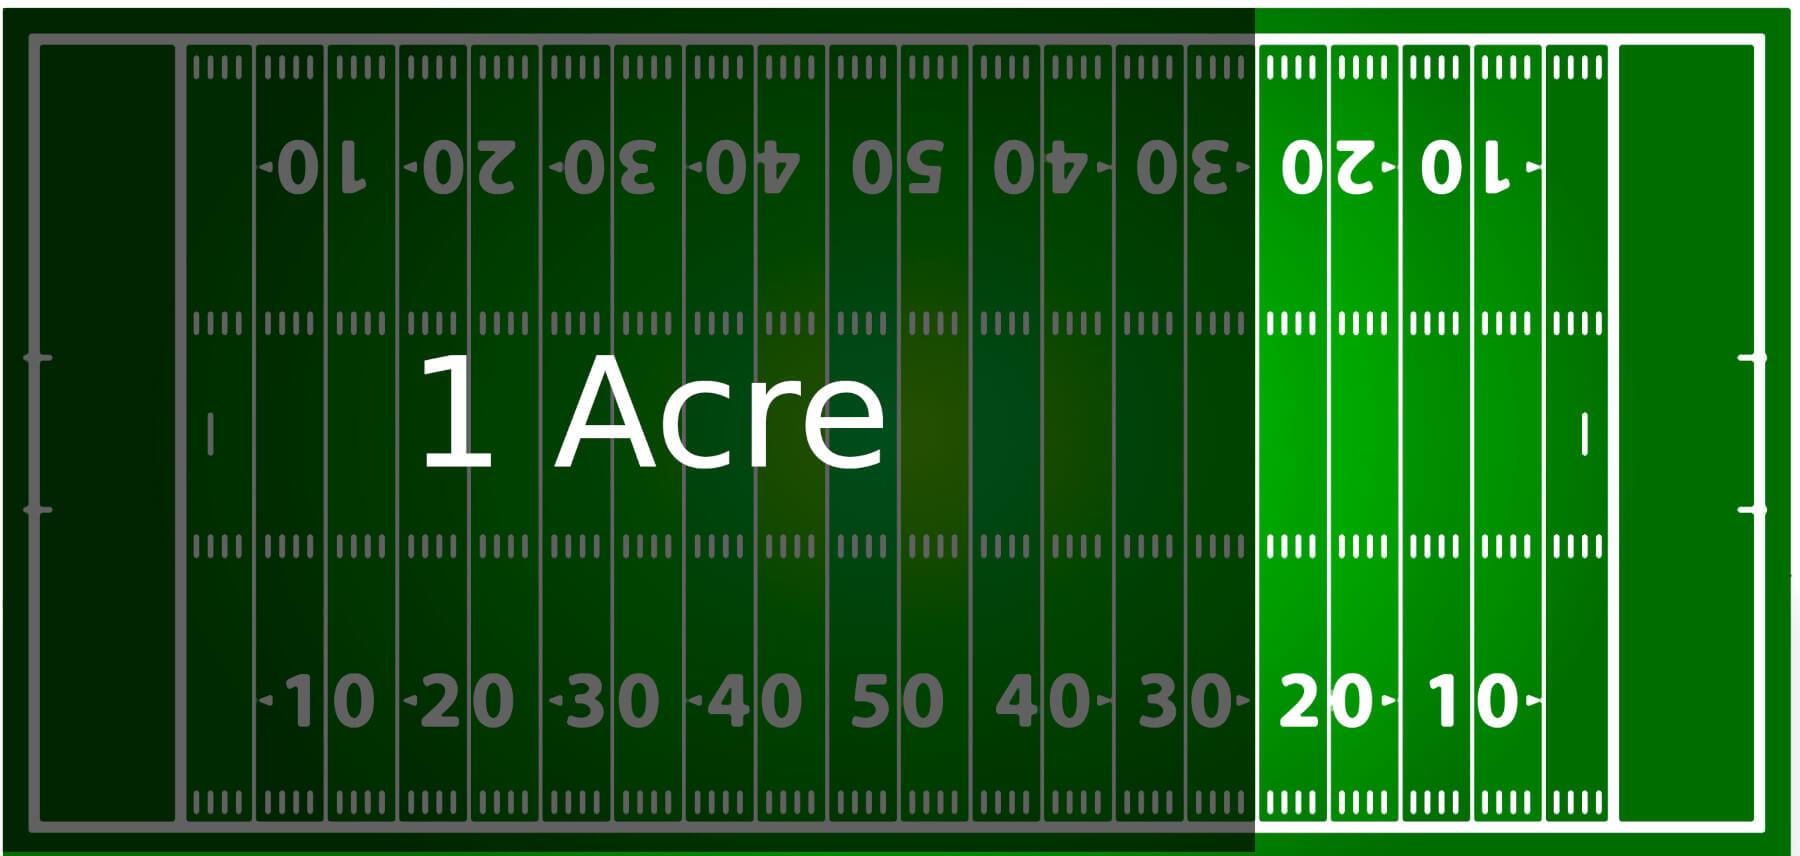 Football field with 1 acre shaded